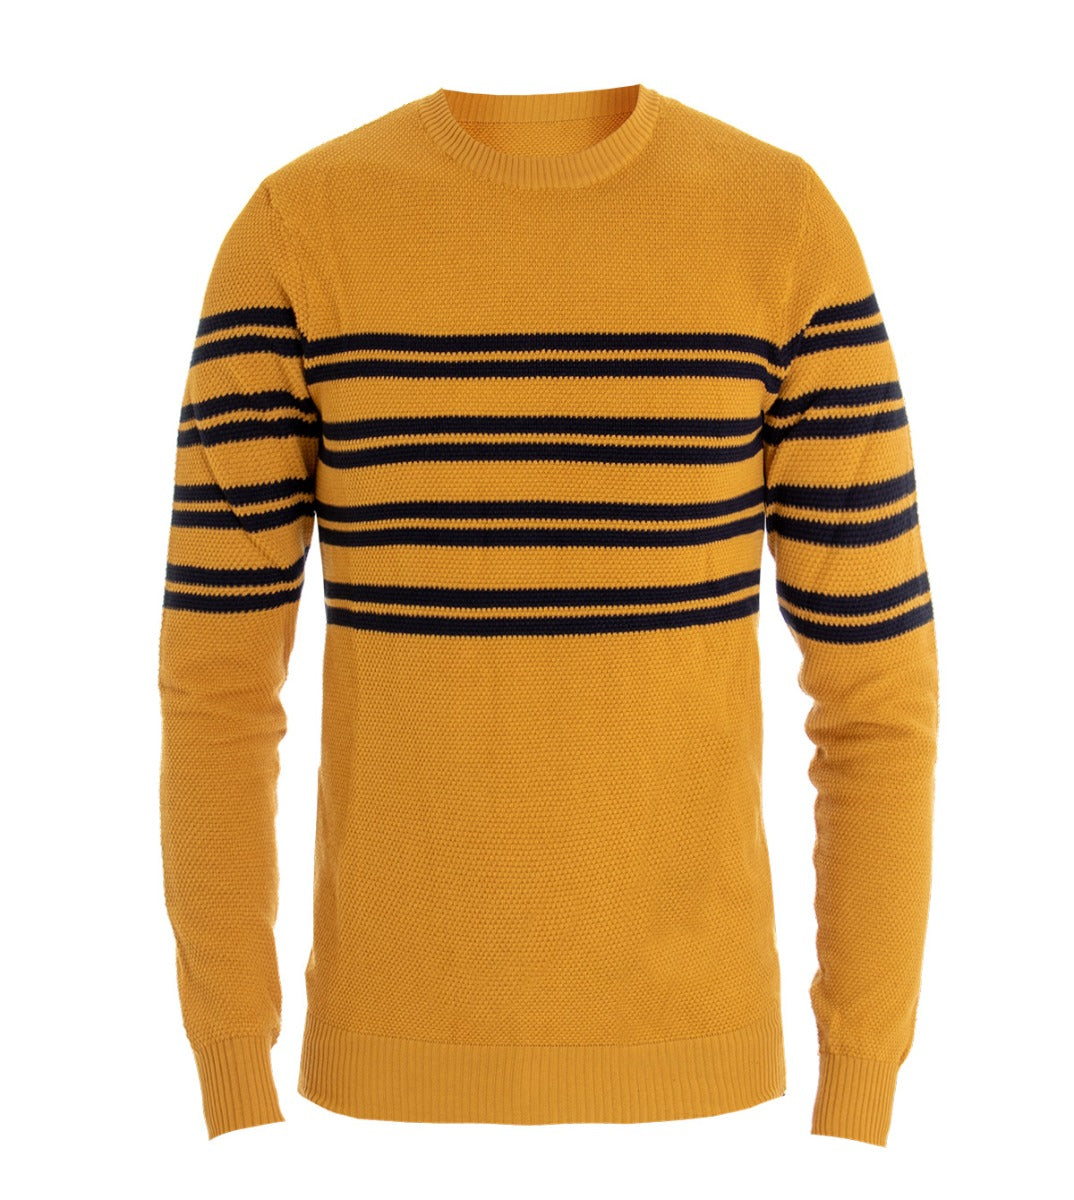 Men's Crew Neck Sweater Mustard Striped Sweater Long Sleeves Knitted Texture GIOSAL